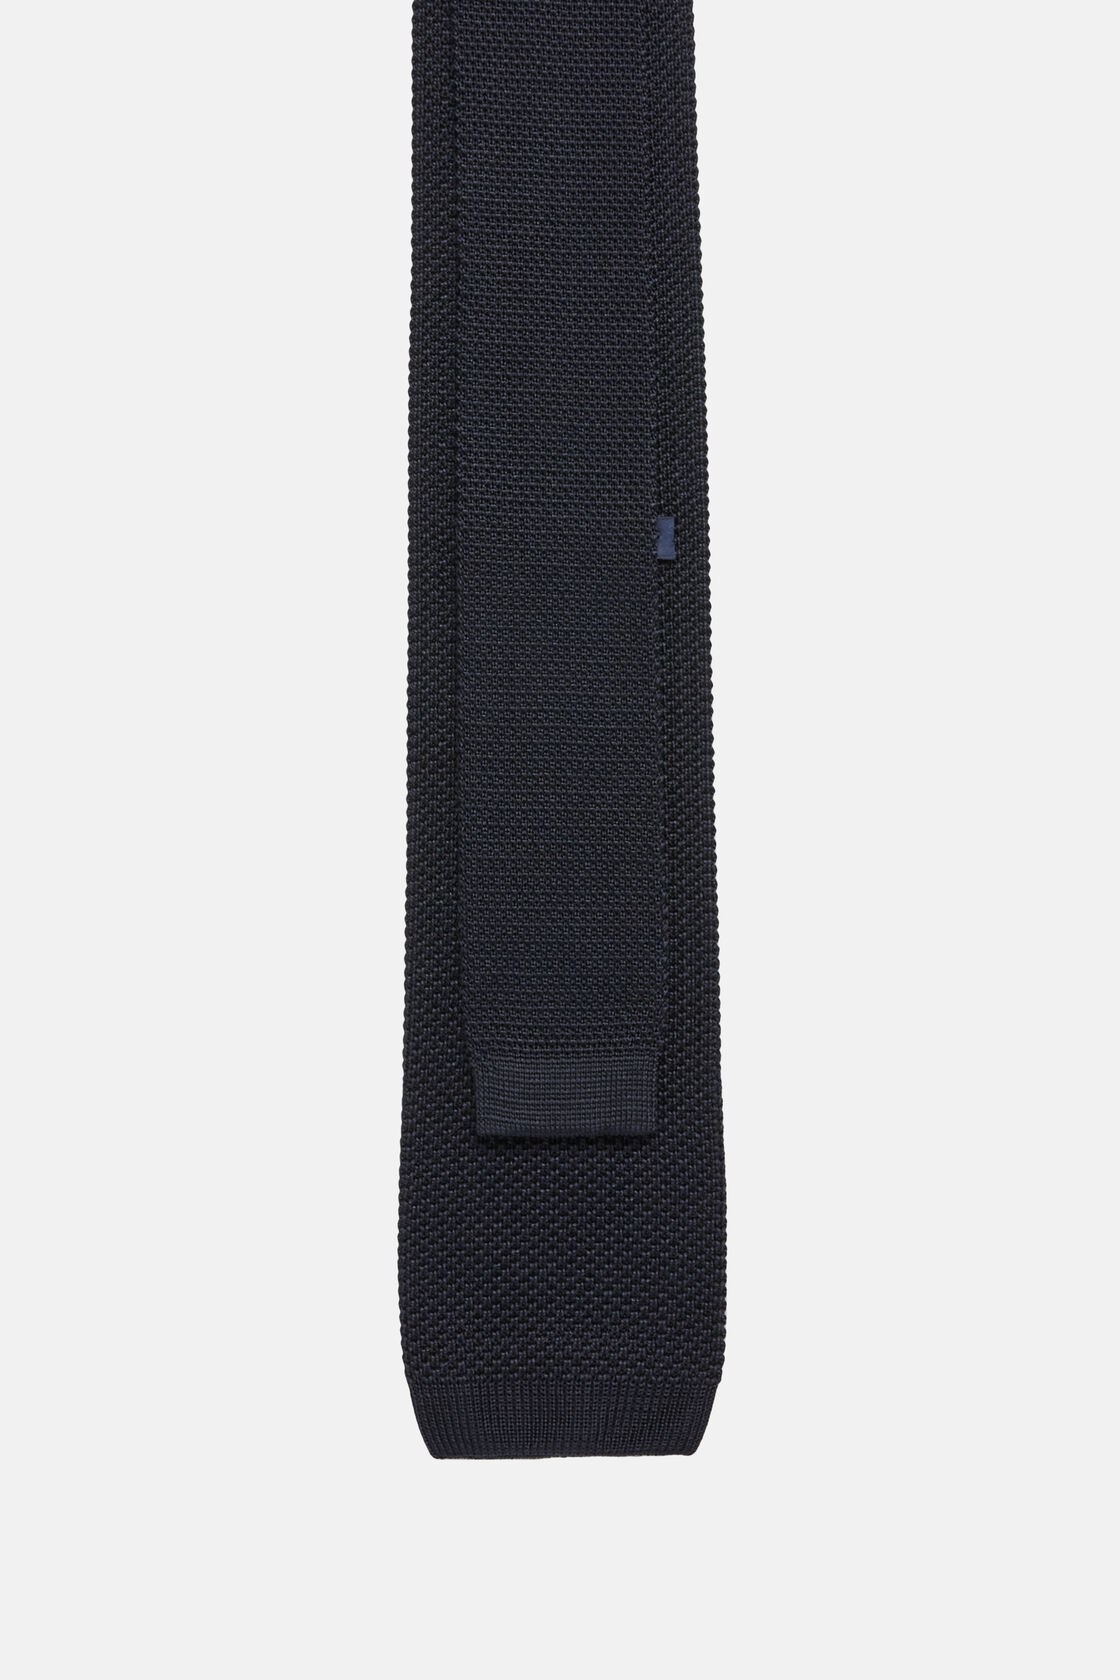 Knitted Tie, Blue, hi-res